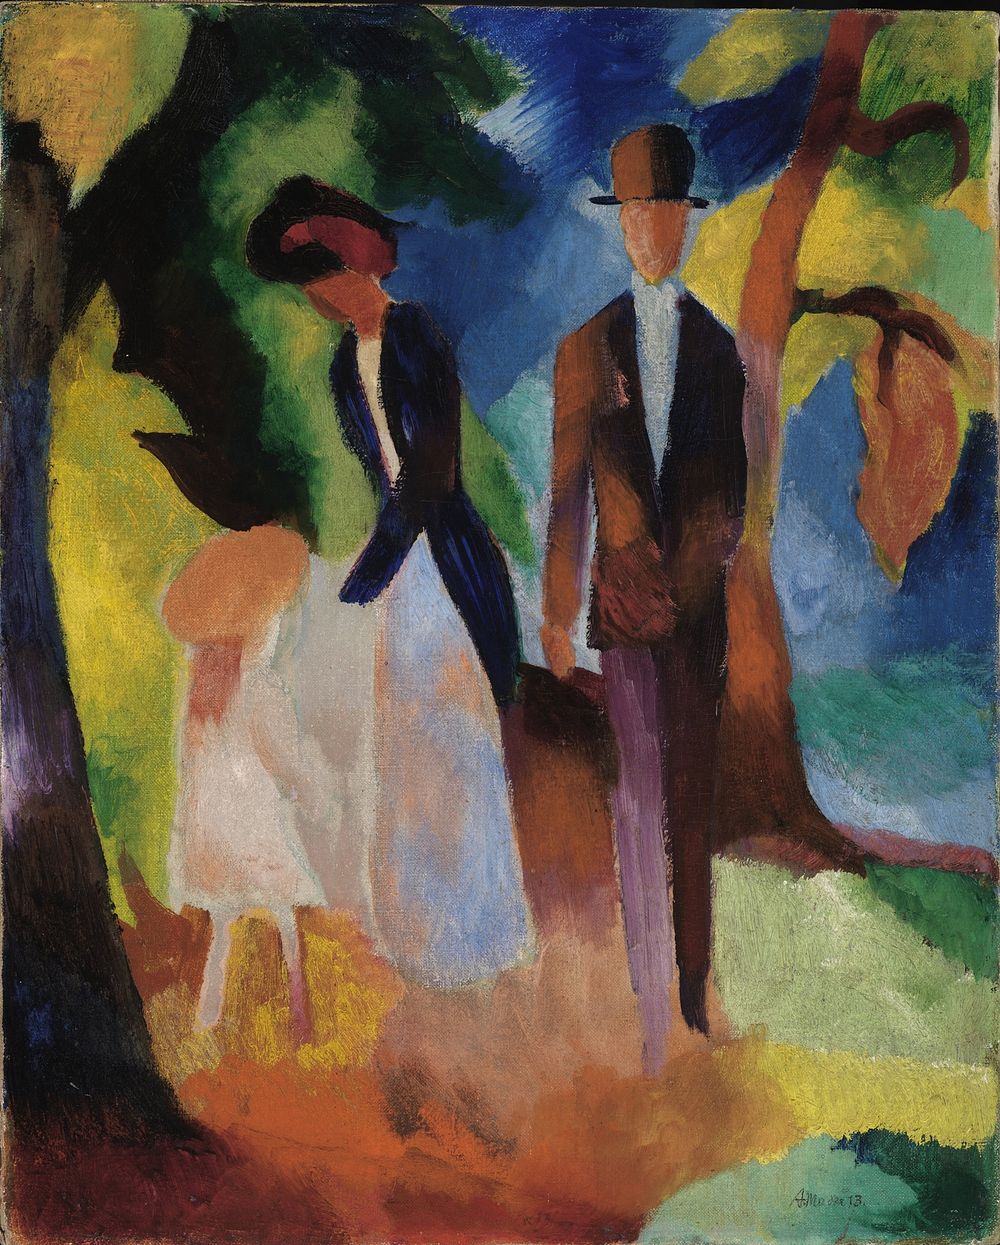 August Macke's People by a Blue Lake (1913) famous painting. Original from Wikimedia Commons. 